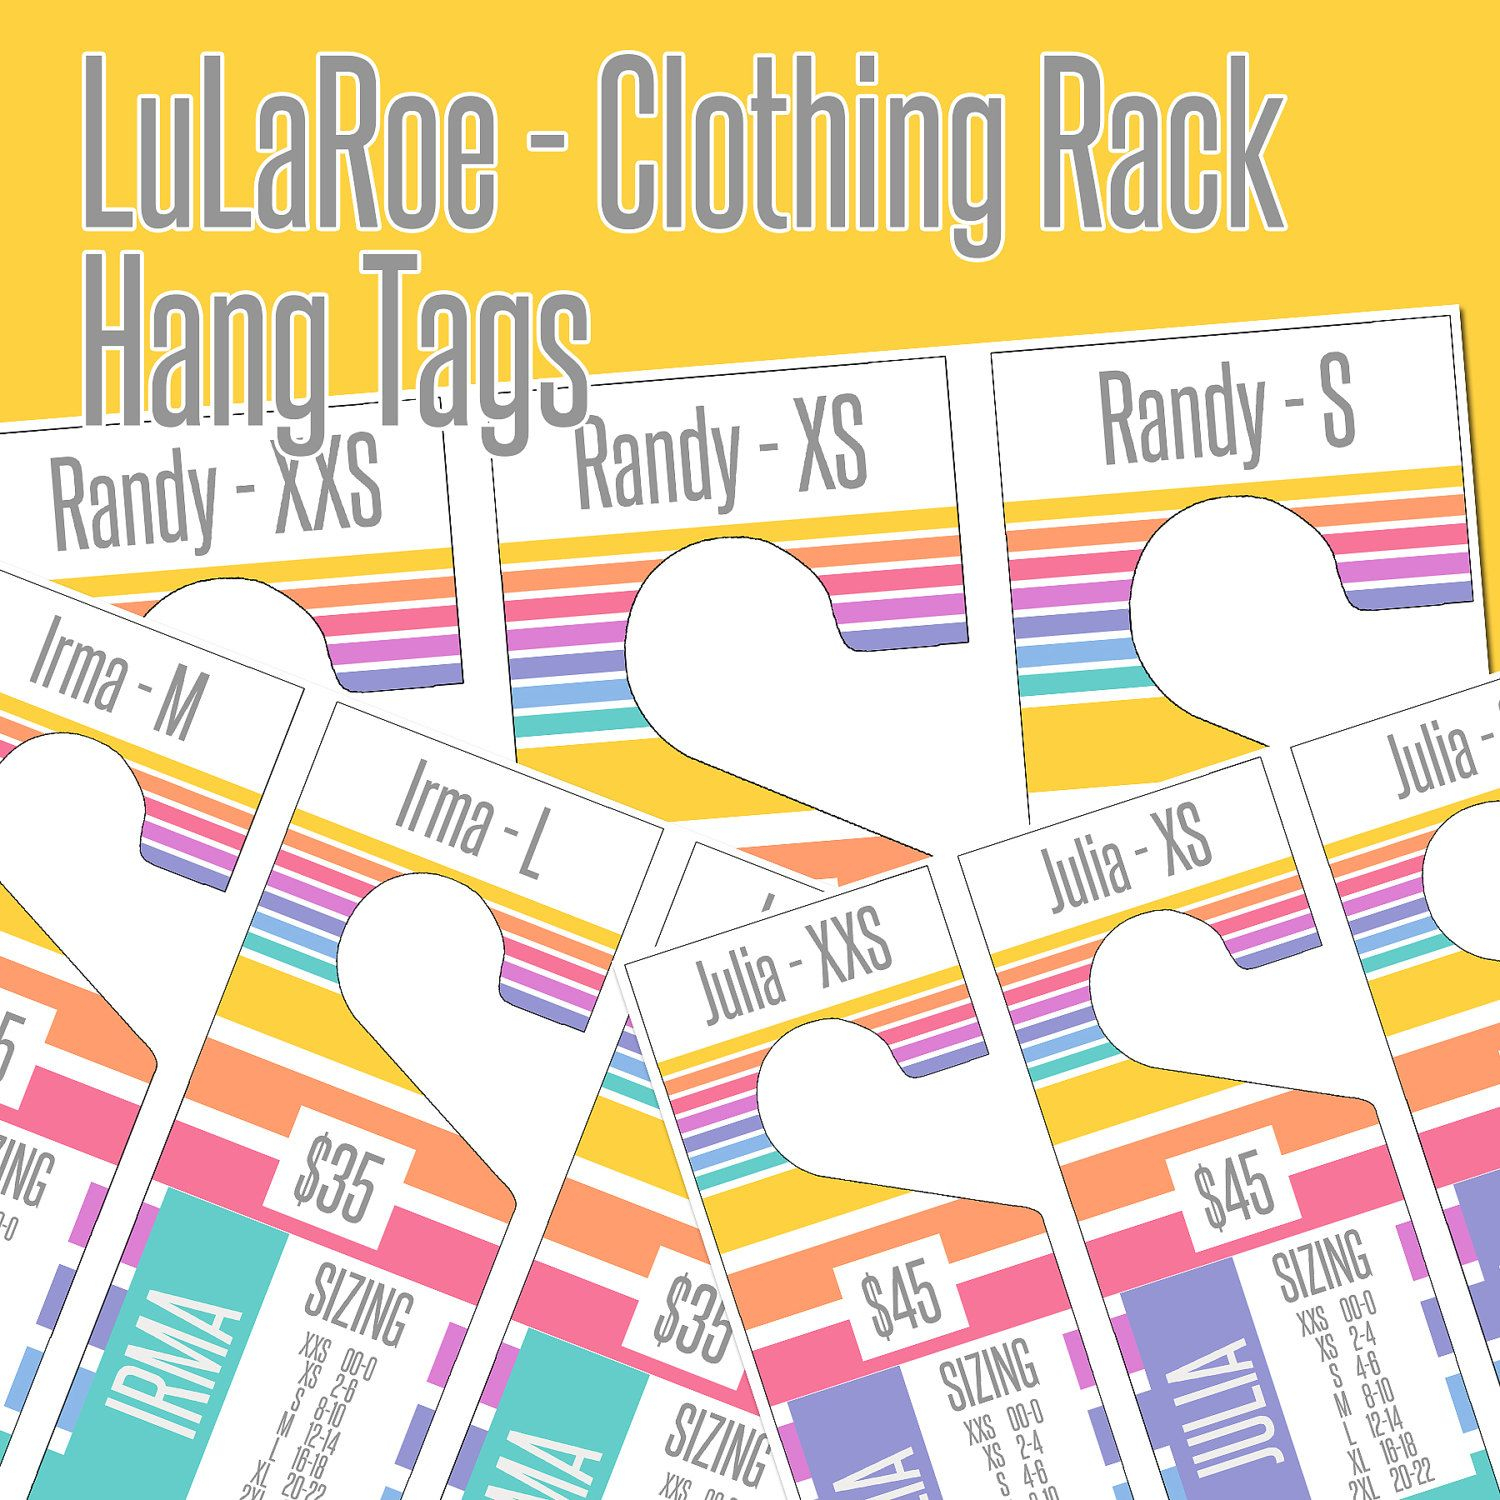 LuLaRoe Clothing Rack Hang Tag Dividers With Styles And Size Charts